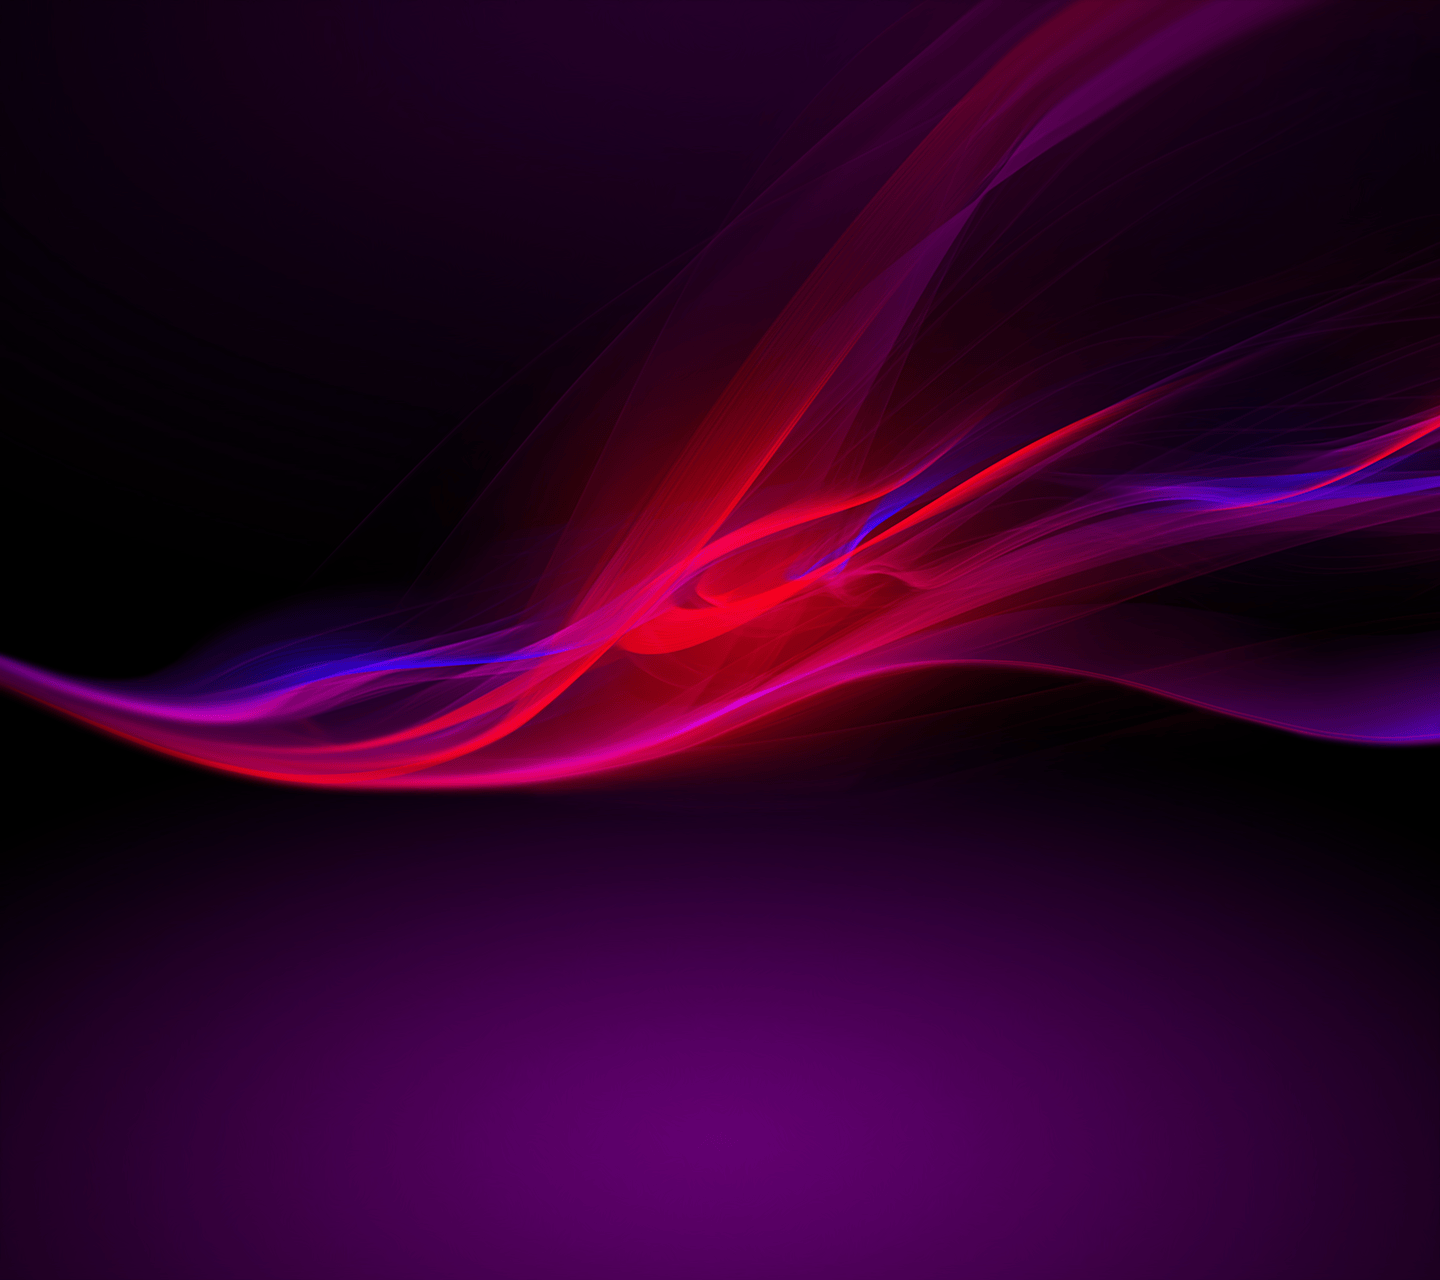 Sony Xperia Z1 Wallpaper , Find HD Wallpaper For Free